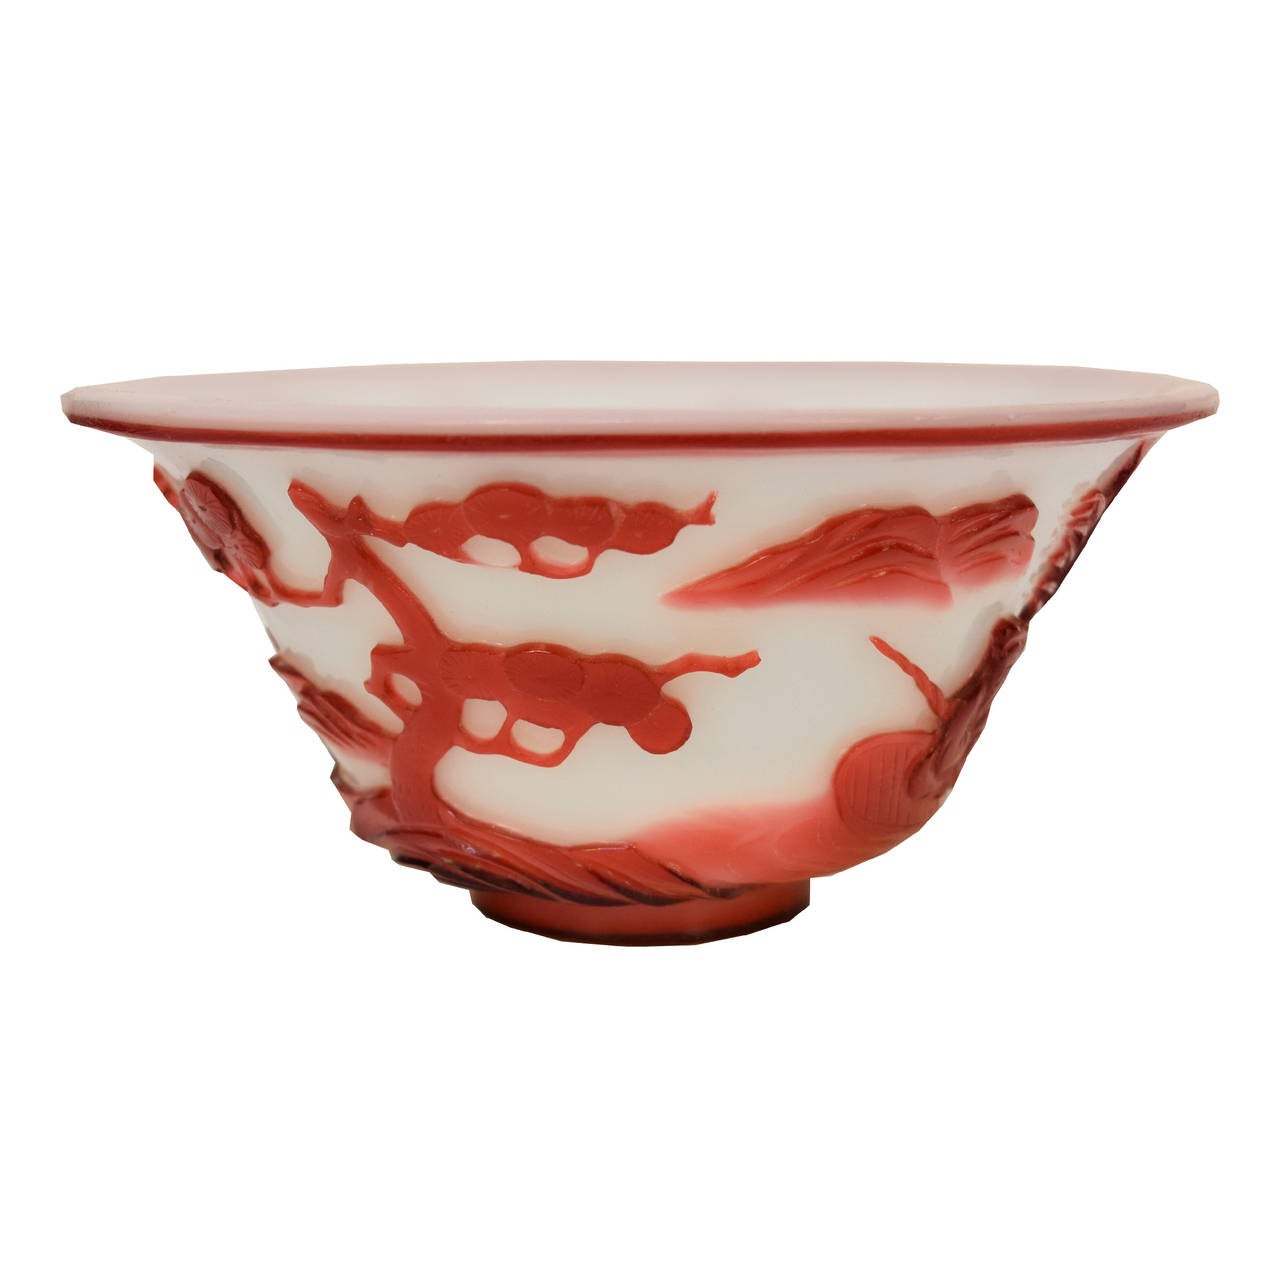 A mid 19th century red and white Peking glass bowl from Beijing, China with figures in a landscape setting.

Pagoda Red Collection # CMK028